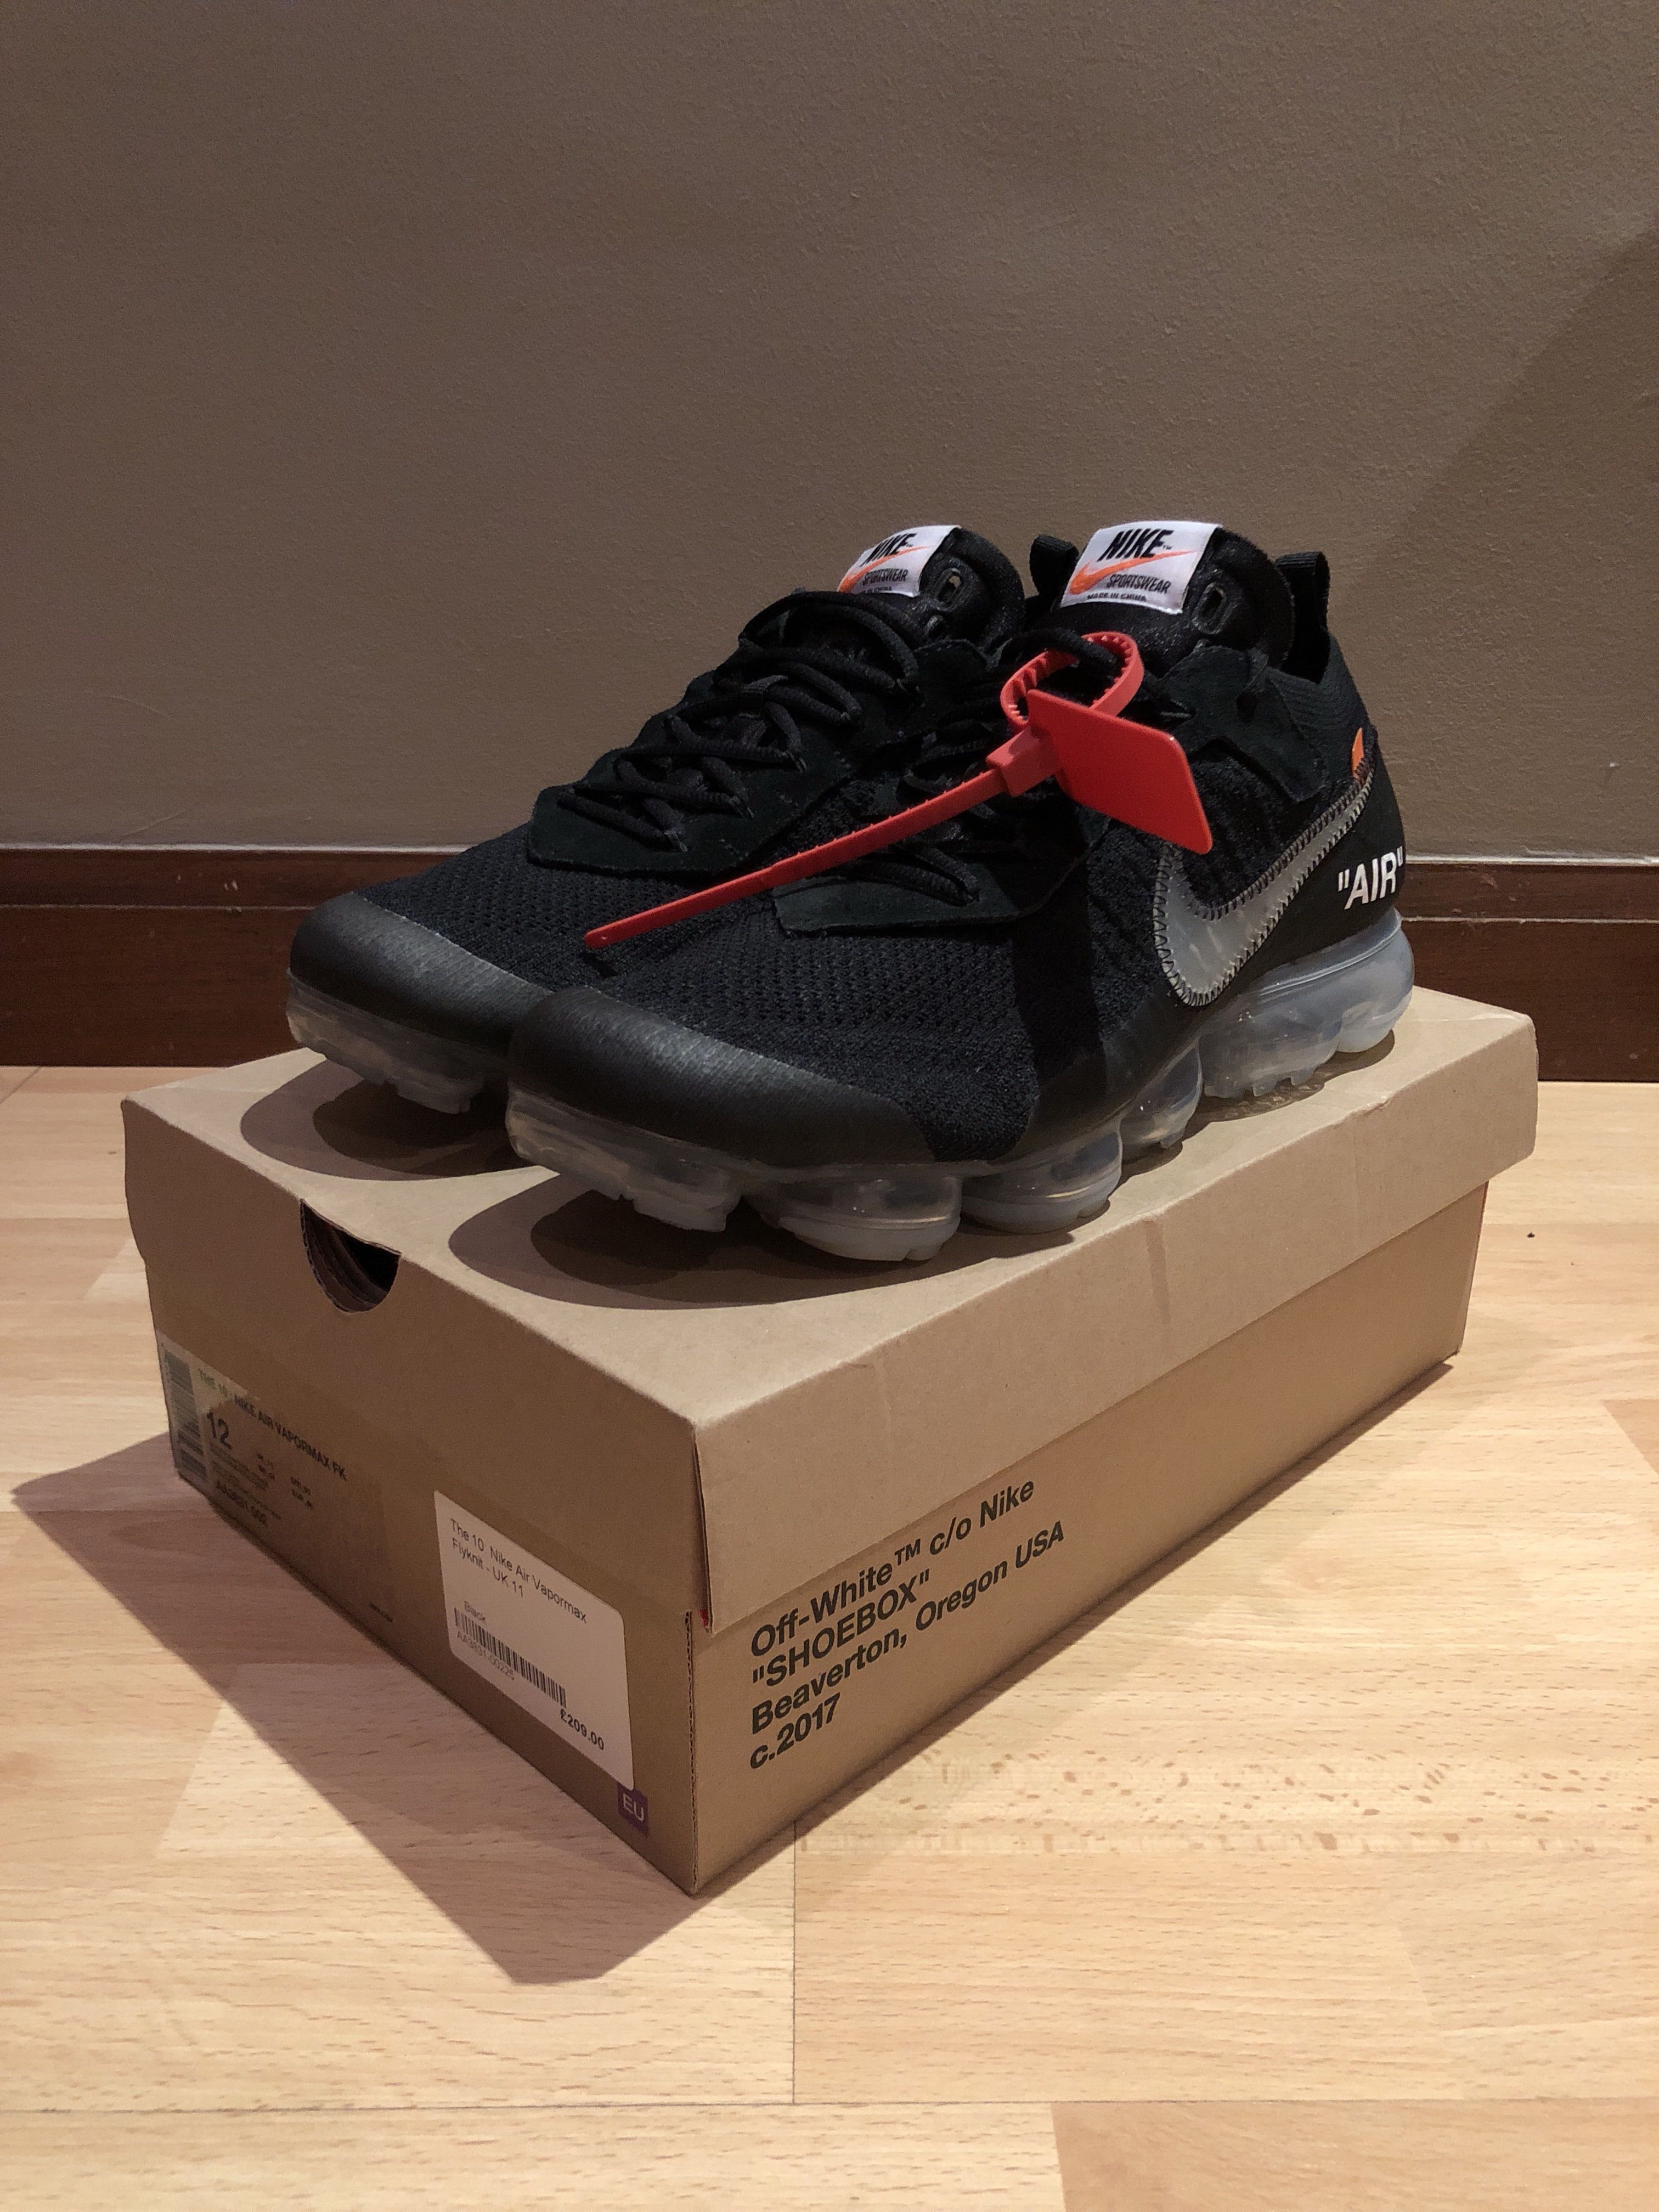 Off White Vapormax Black Box For Sale Off 63